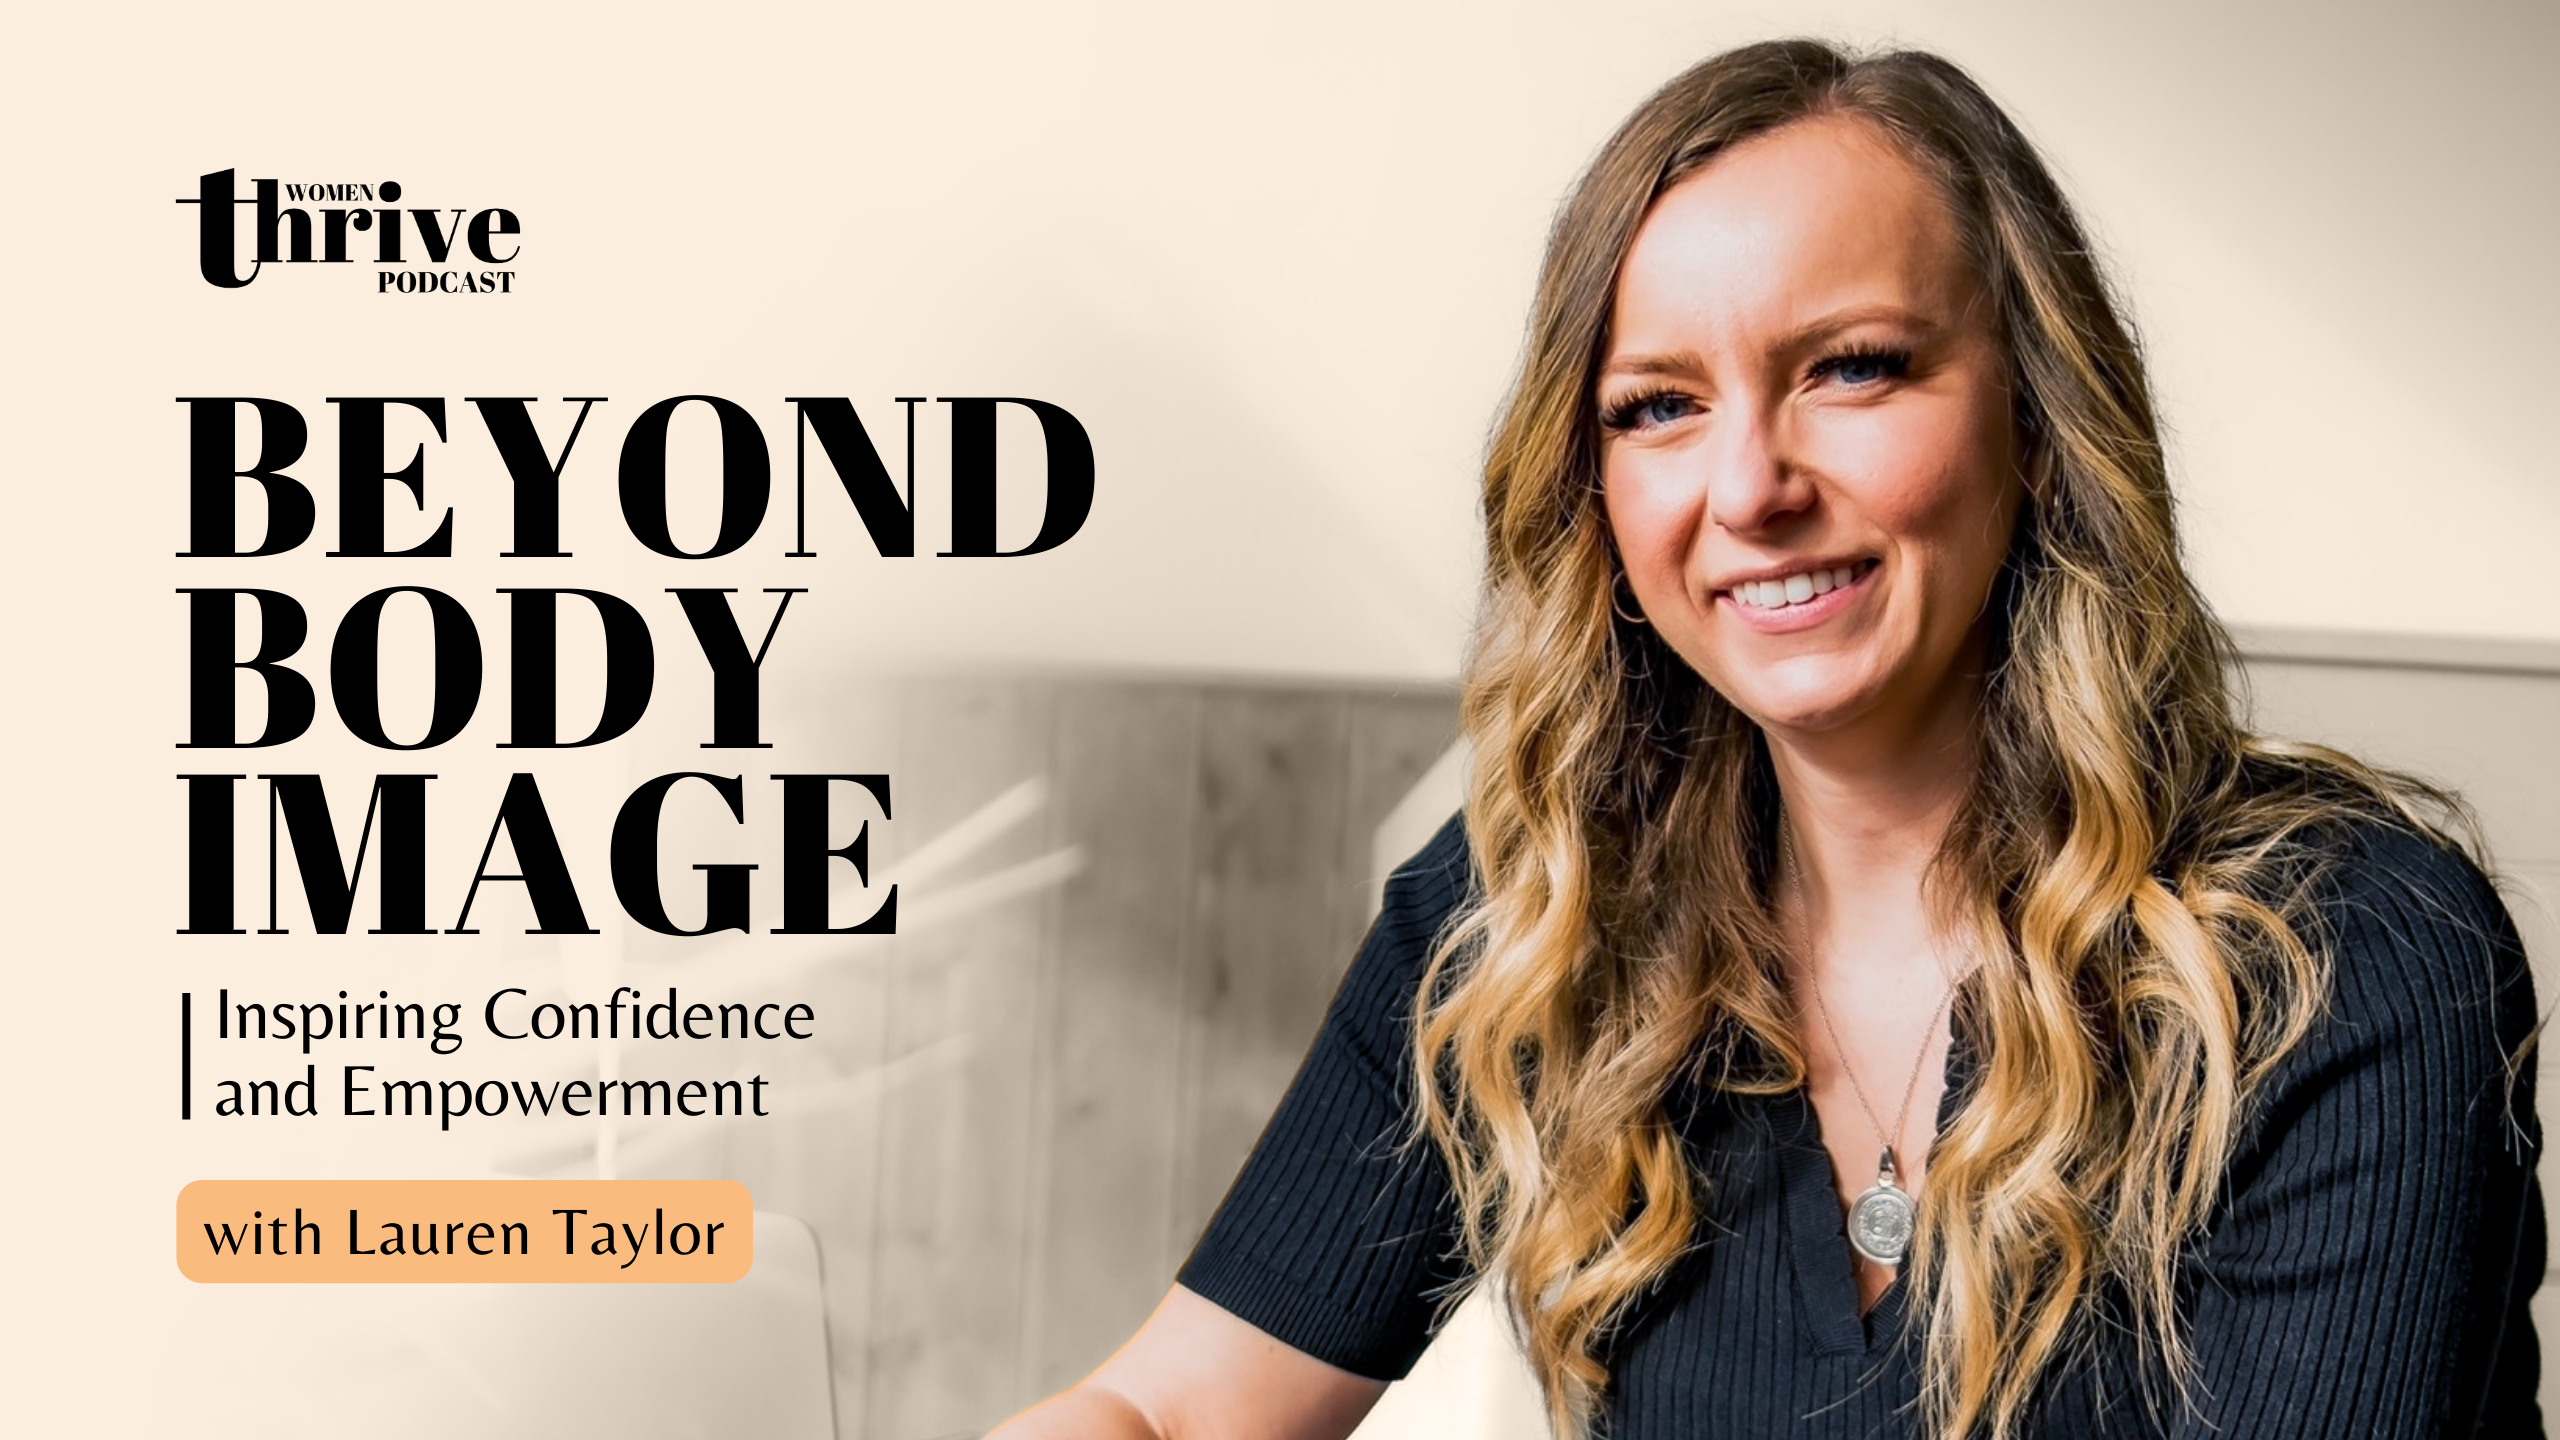 Beyond Body Image: Inspiring Confidence and Empowerment with Lauren Taylor